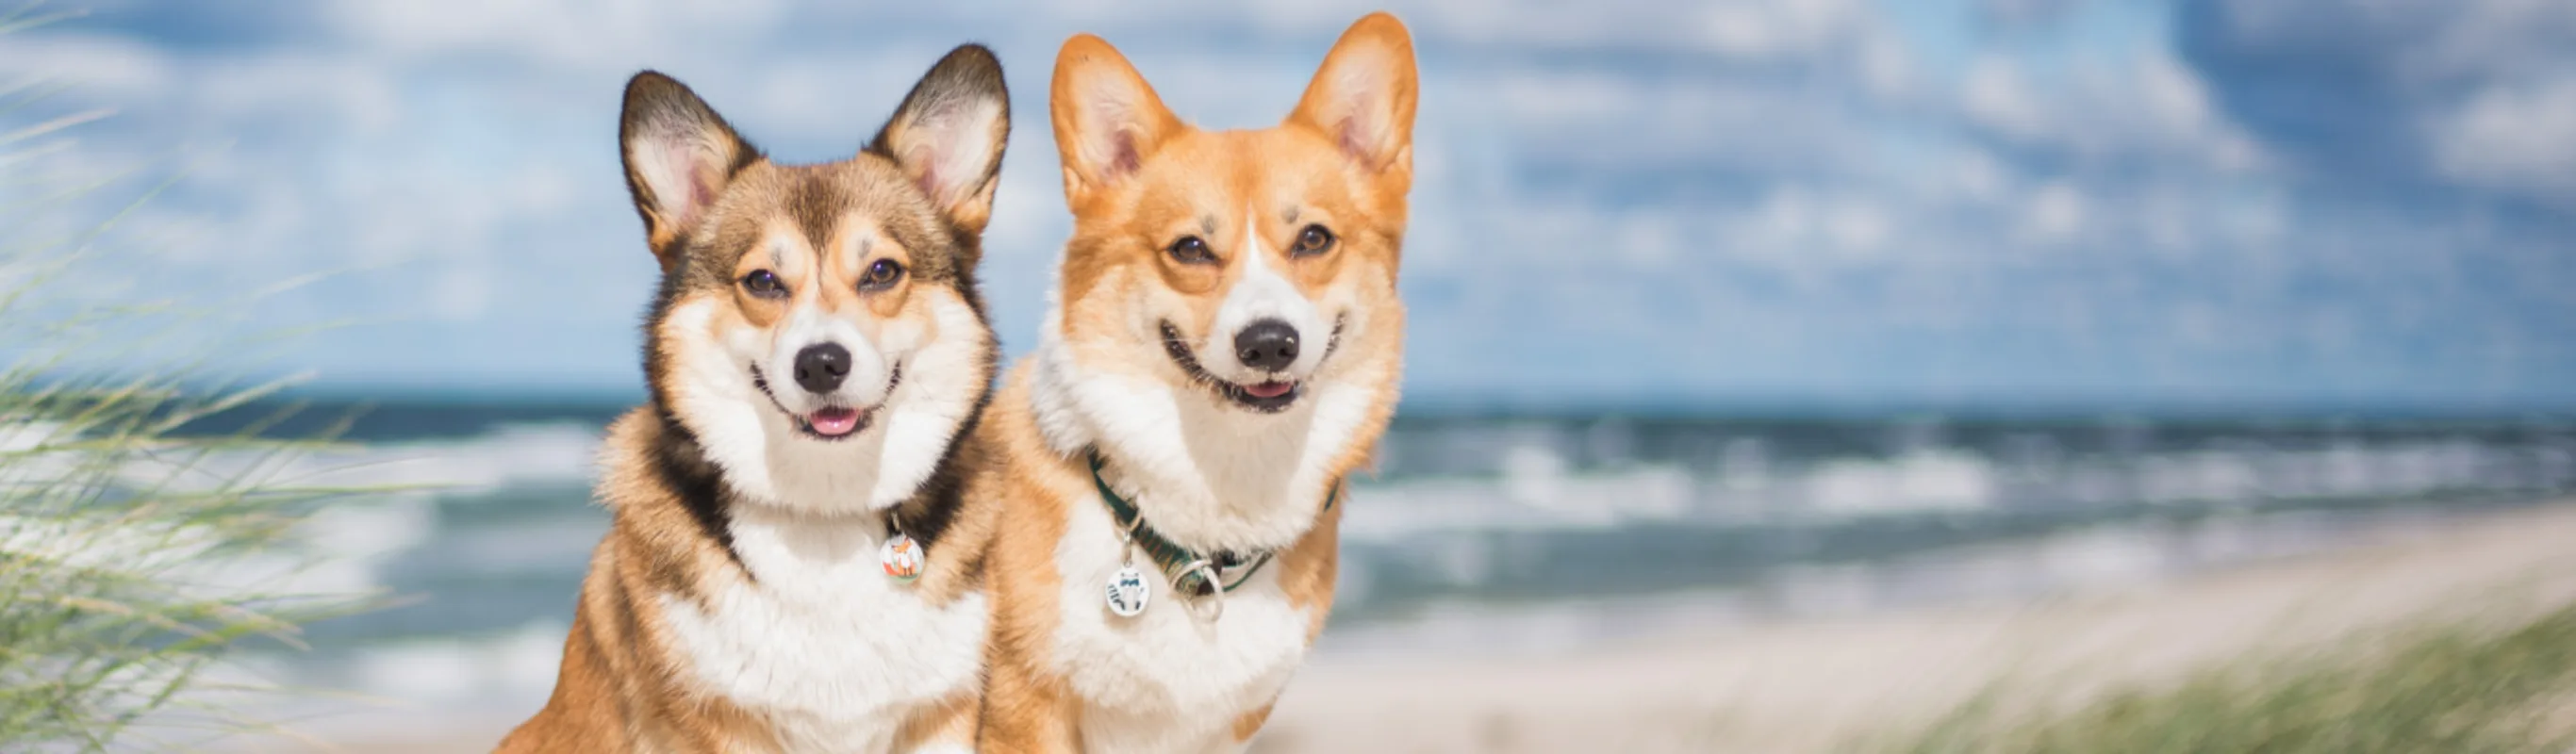 2 corgis sitting together on the beach with the water behind them